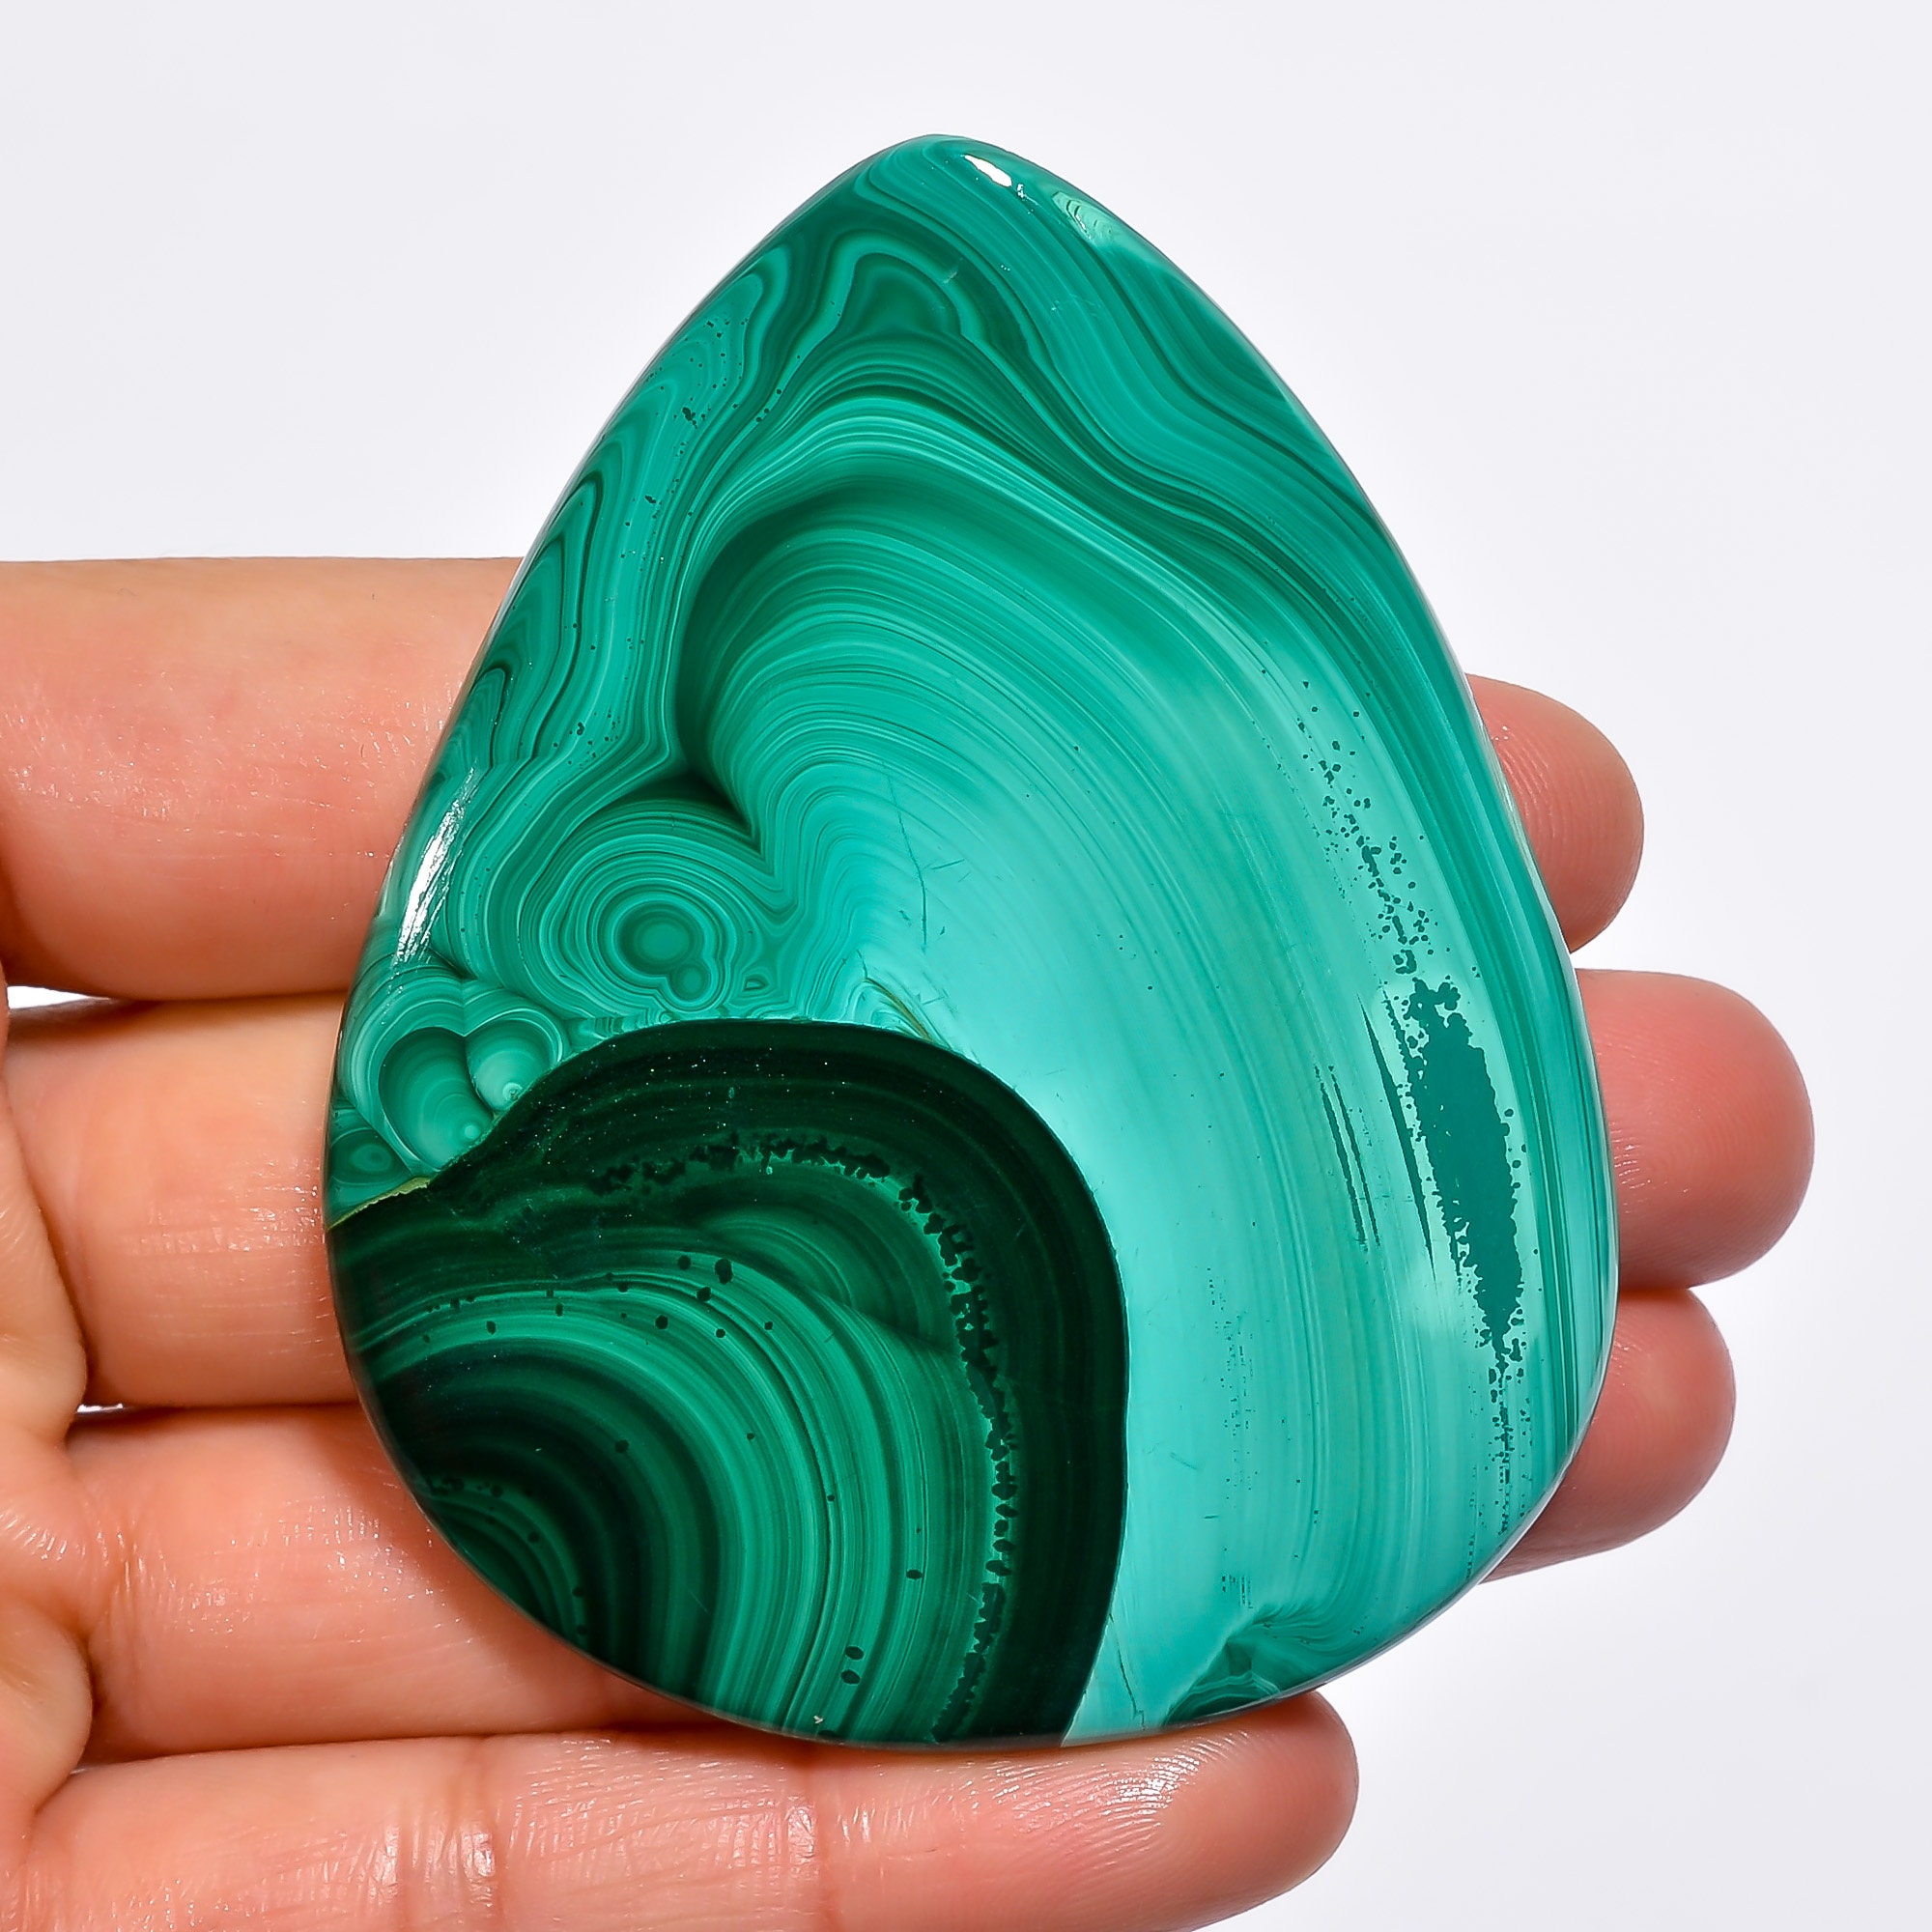 39X30X6 mm CH-224 Unique Top Grade Quality 100% Natural Malachite Pear Shape Cabochon Loose Gemstone For Making Jewelry 78.5 Ct